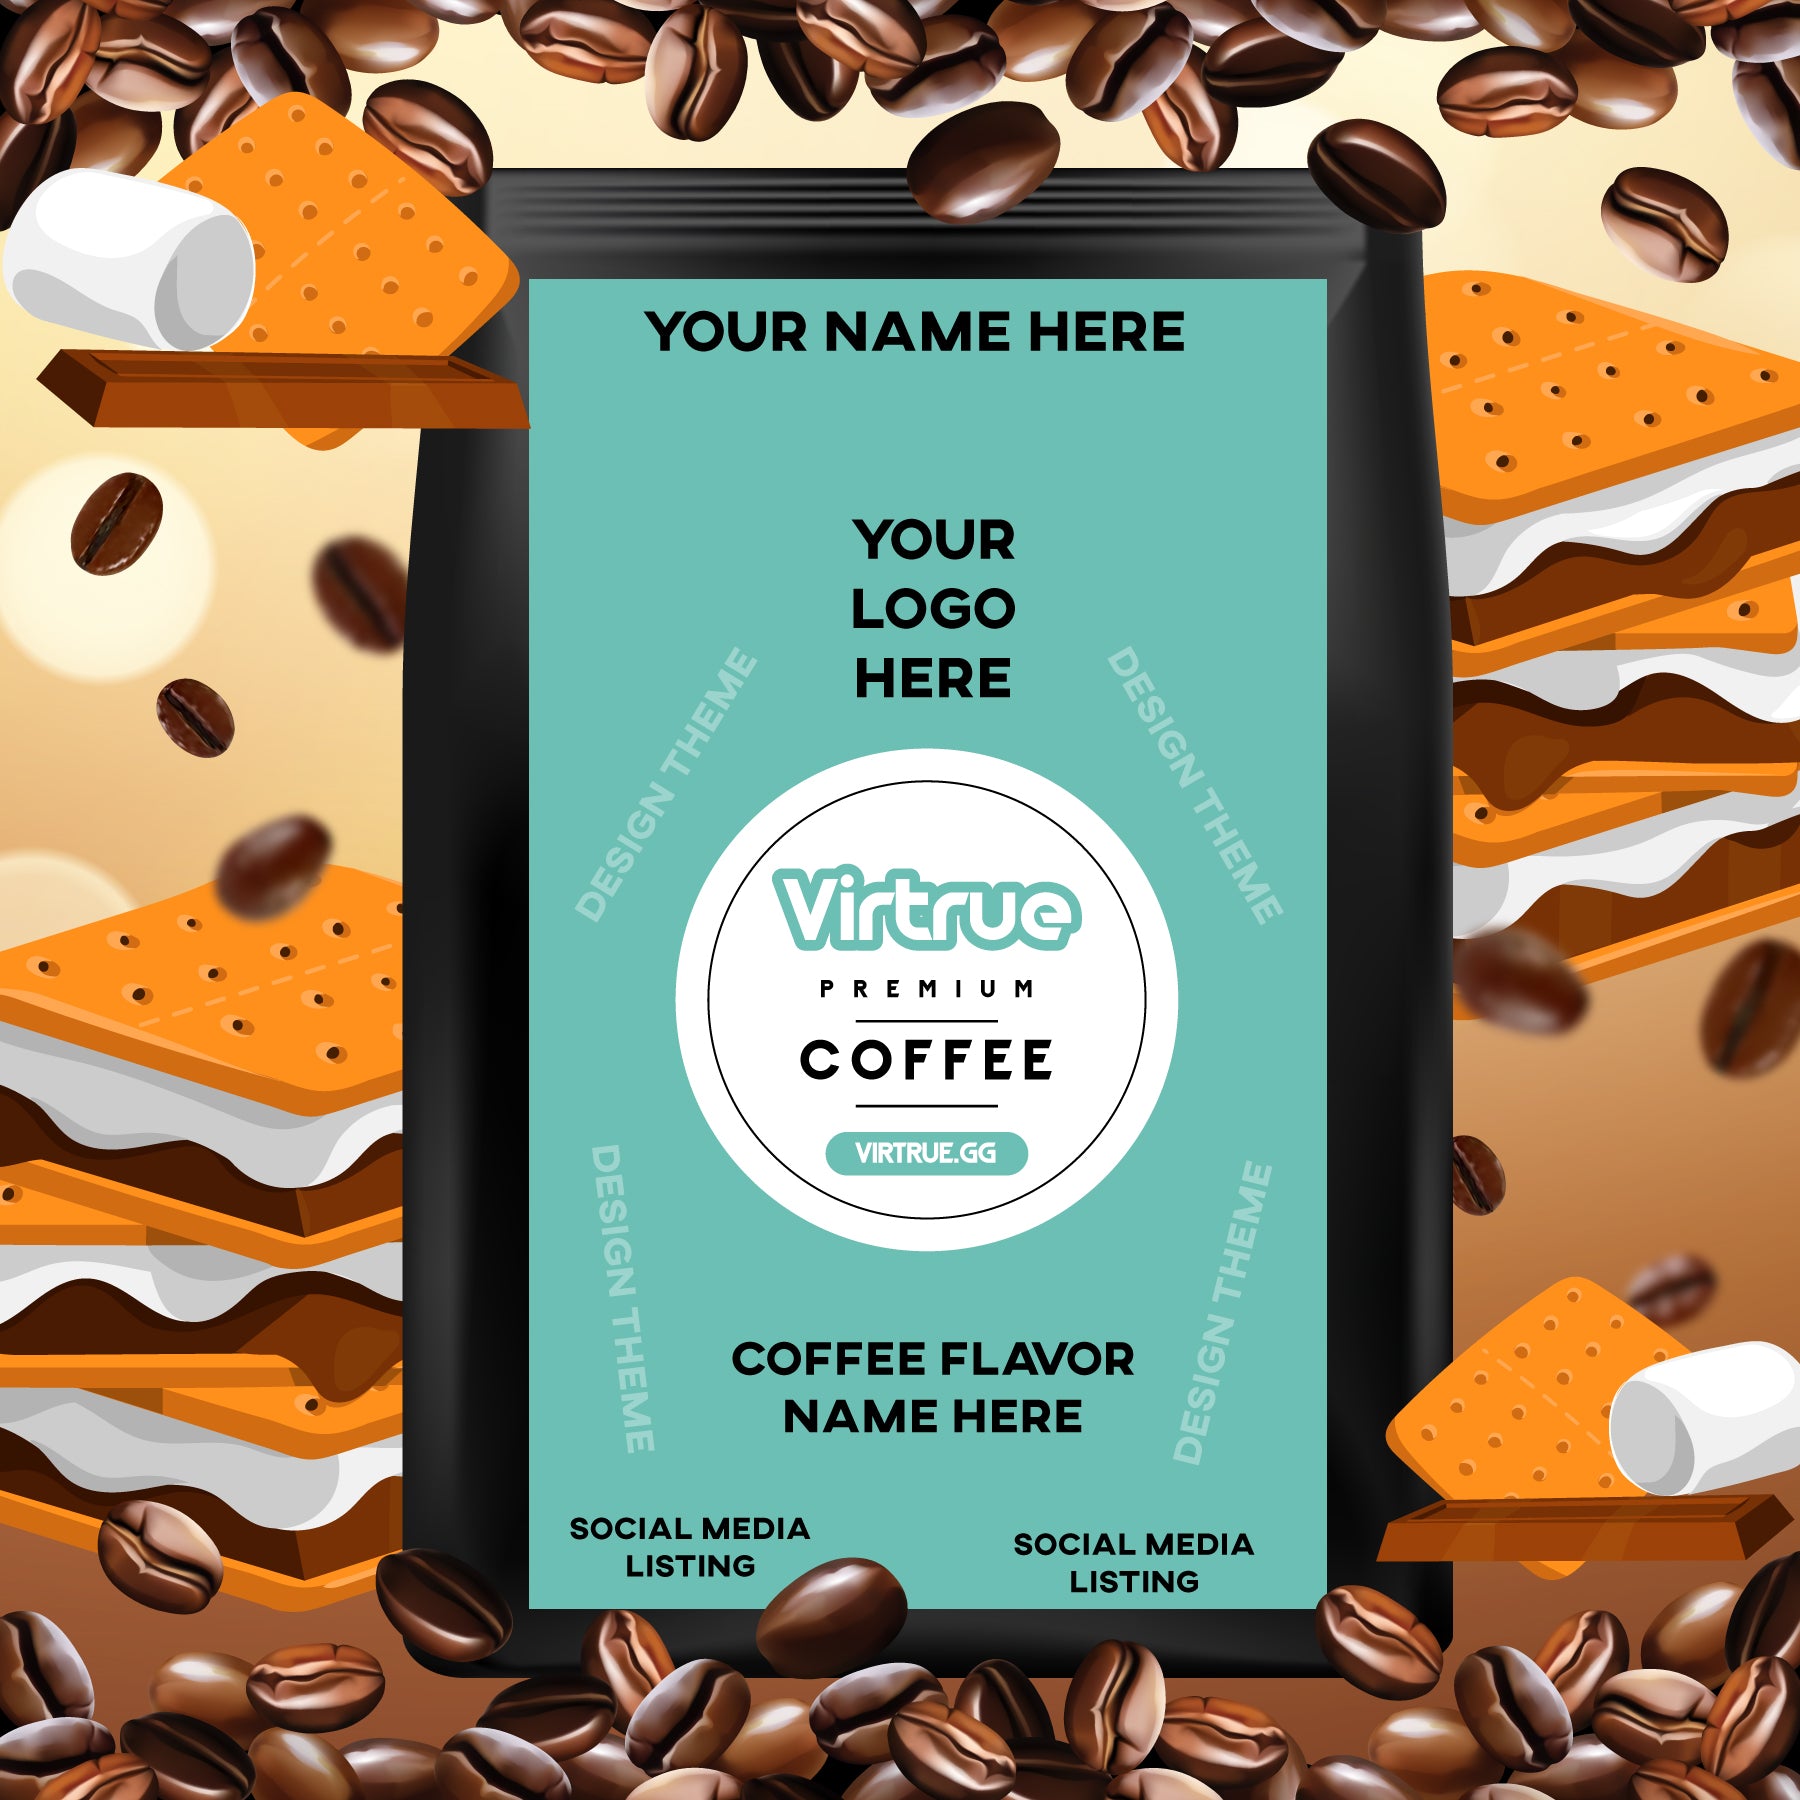 Launch Your Own Coffee Brand